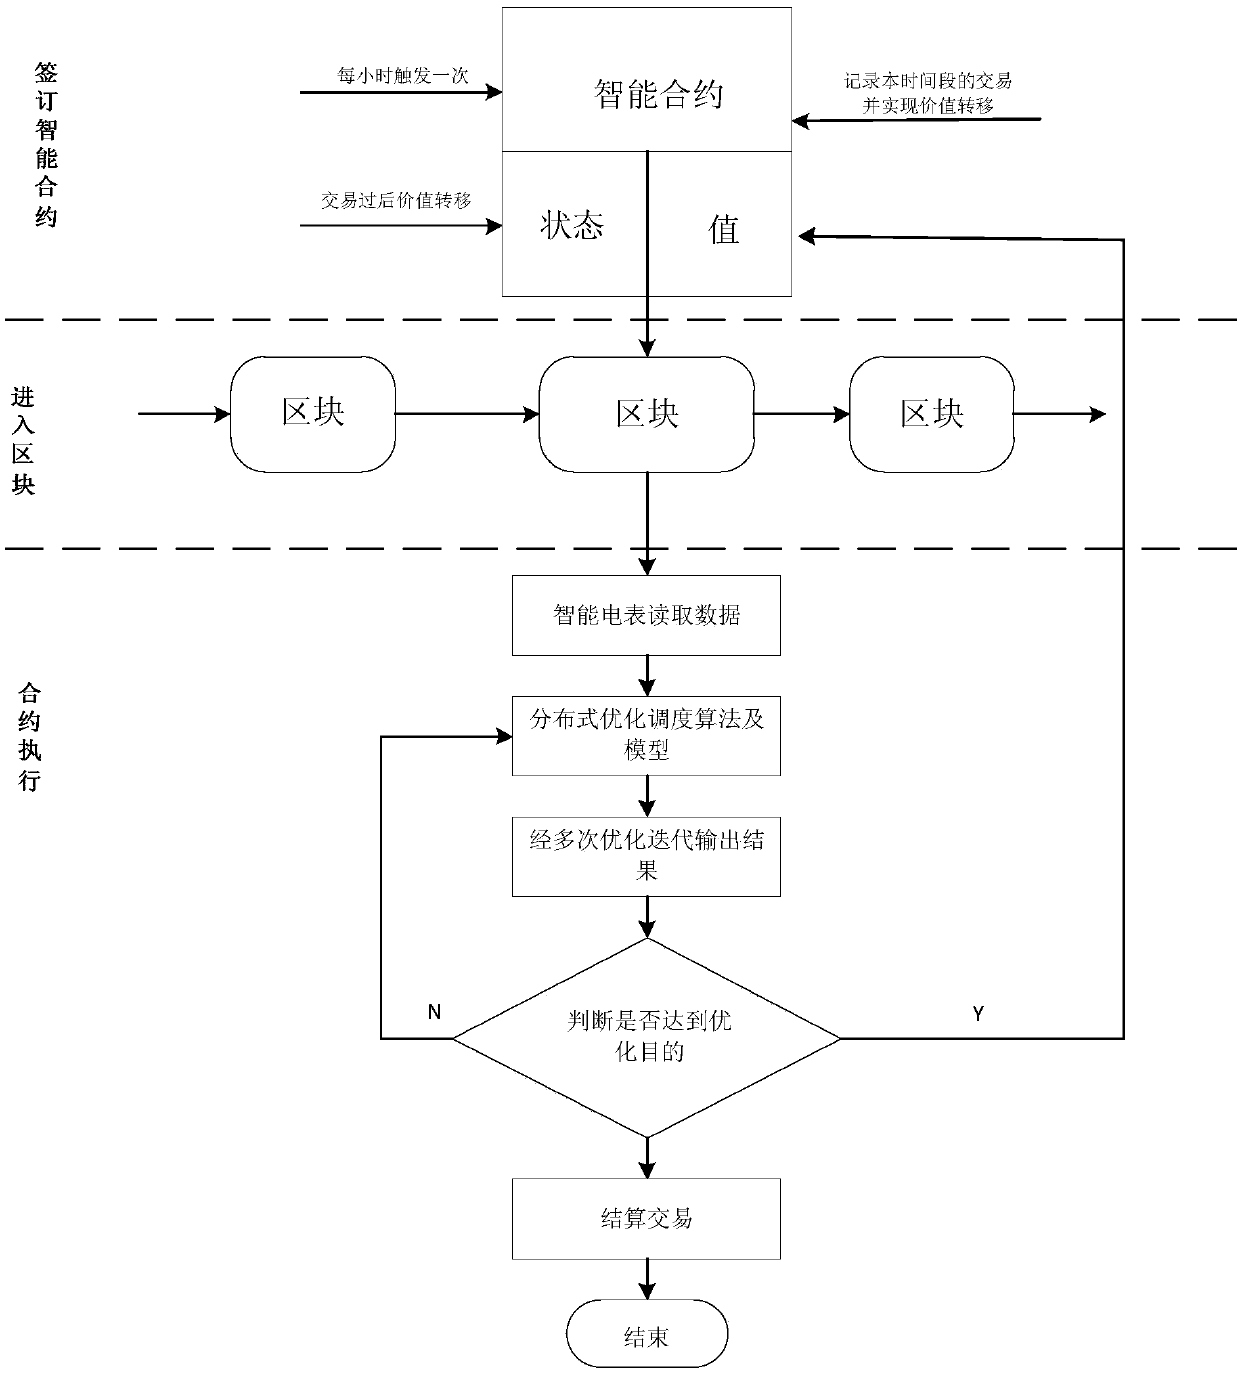 Distributed optimal scheduling method for interconnected micronetworks based on intelligent contract